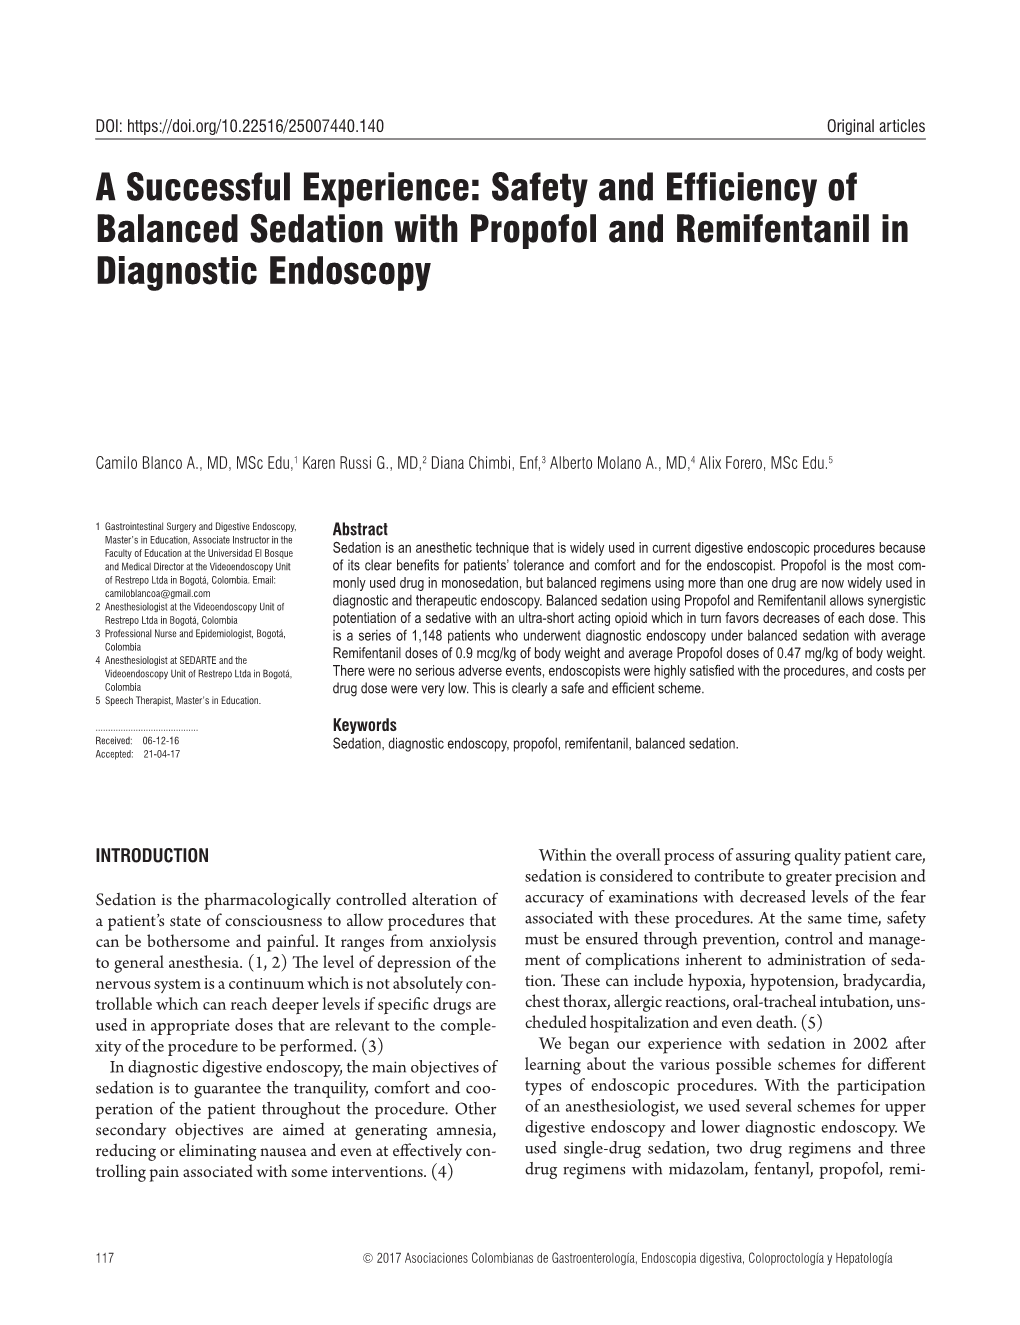 Safety and Efficiency of Balanced Sedation with Propofol and Remifentanil in Diagnostic Endoscopy